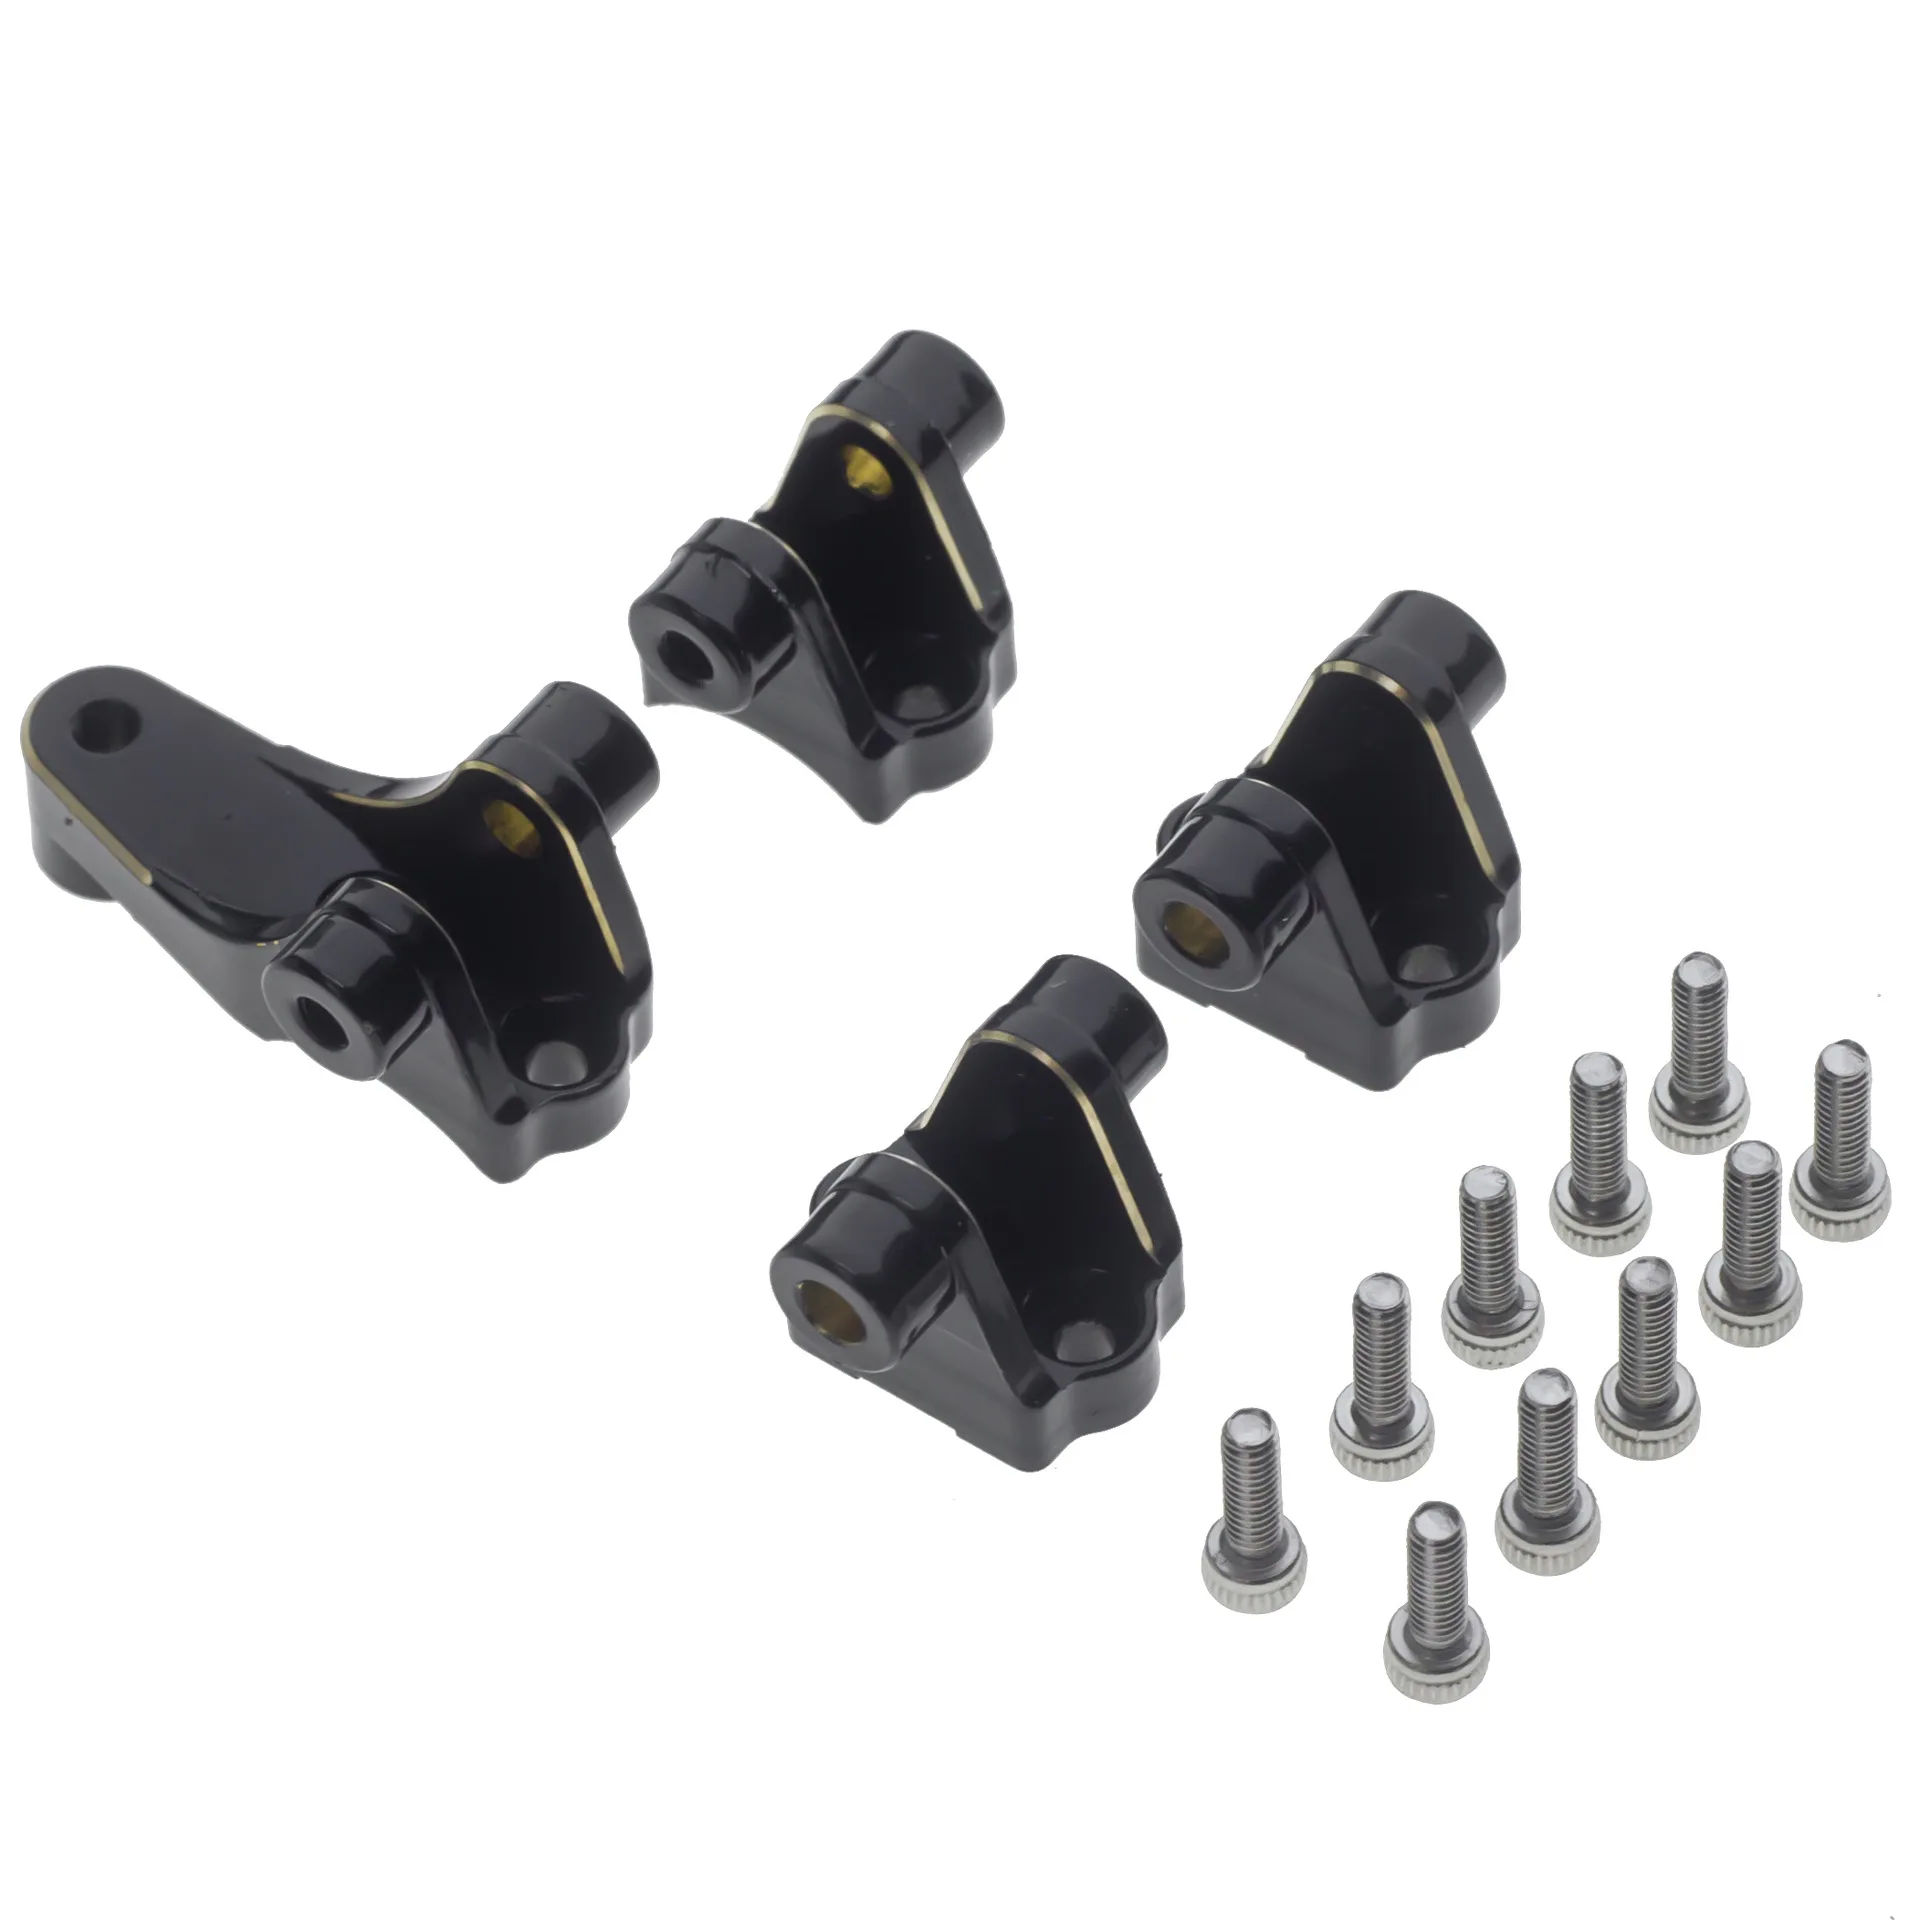 

4pcs Brass Front and Rear Axle Mount Set Suspension Links Stand Holder 8227 for Traxxas TRX4 1/10 RC Crawler Car Upgrade Parts